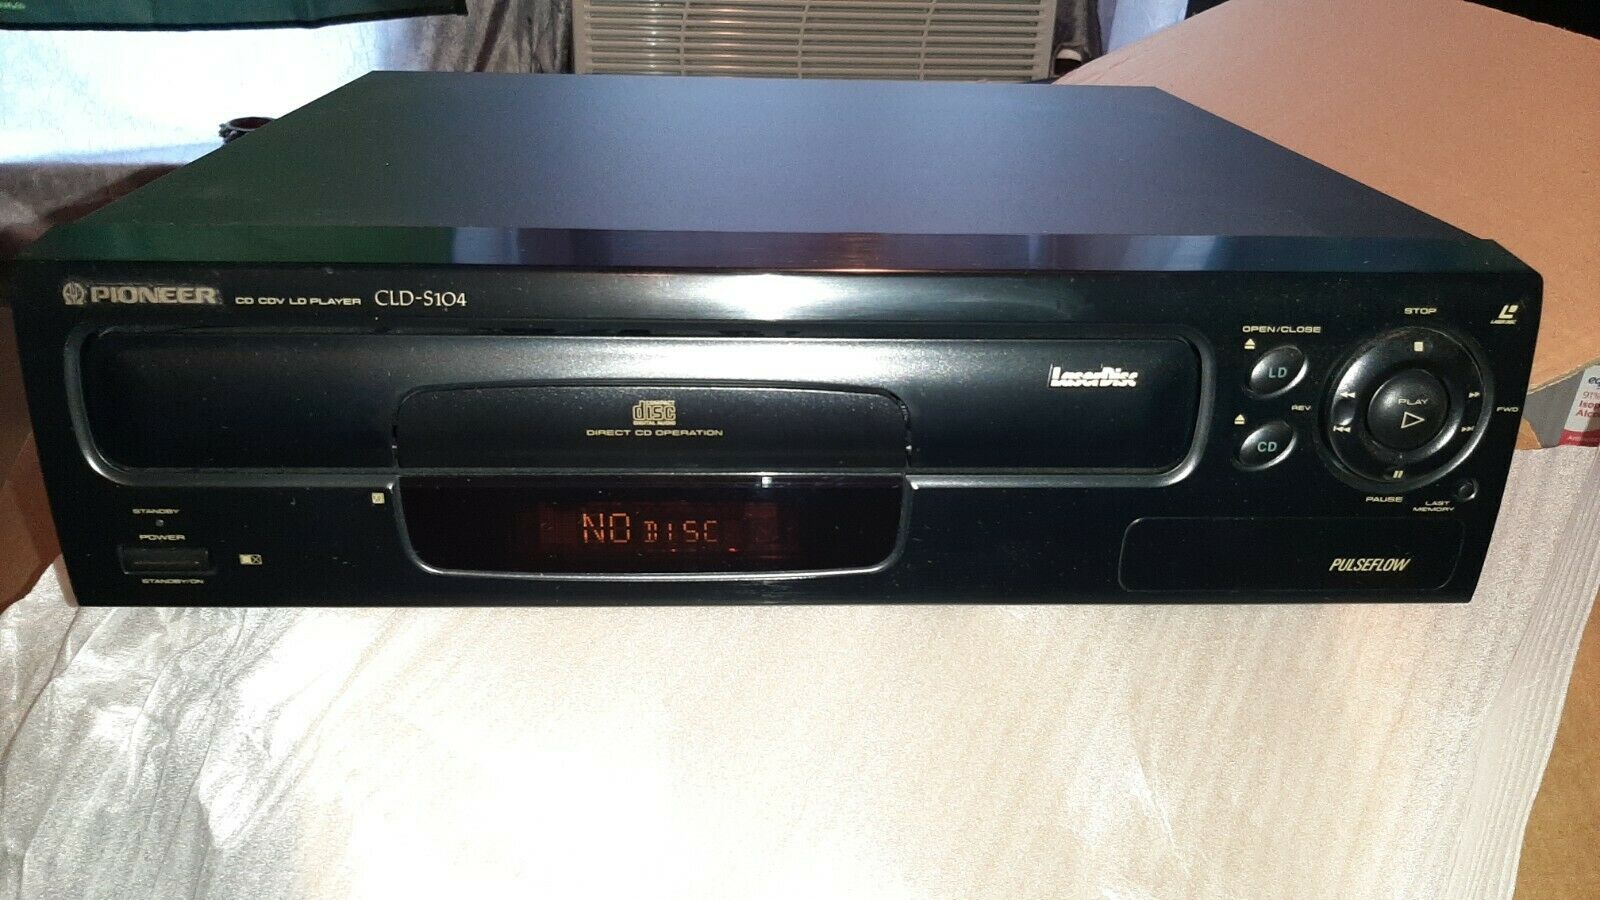 Pioneer Cld-s104 Laser Disc Player , Excellent Condition W Remote And Manual